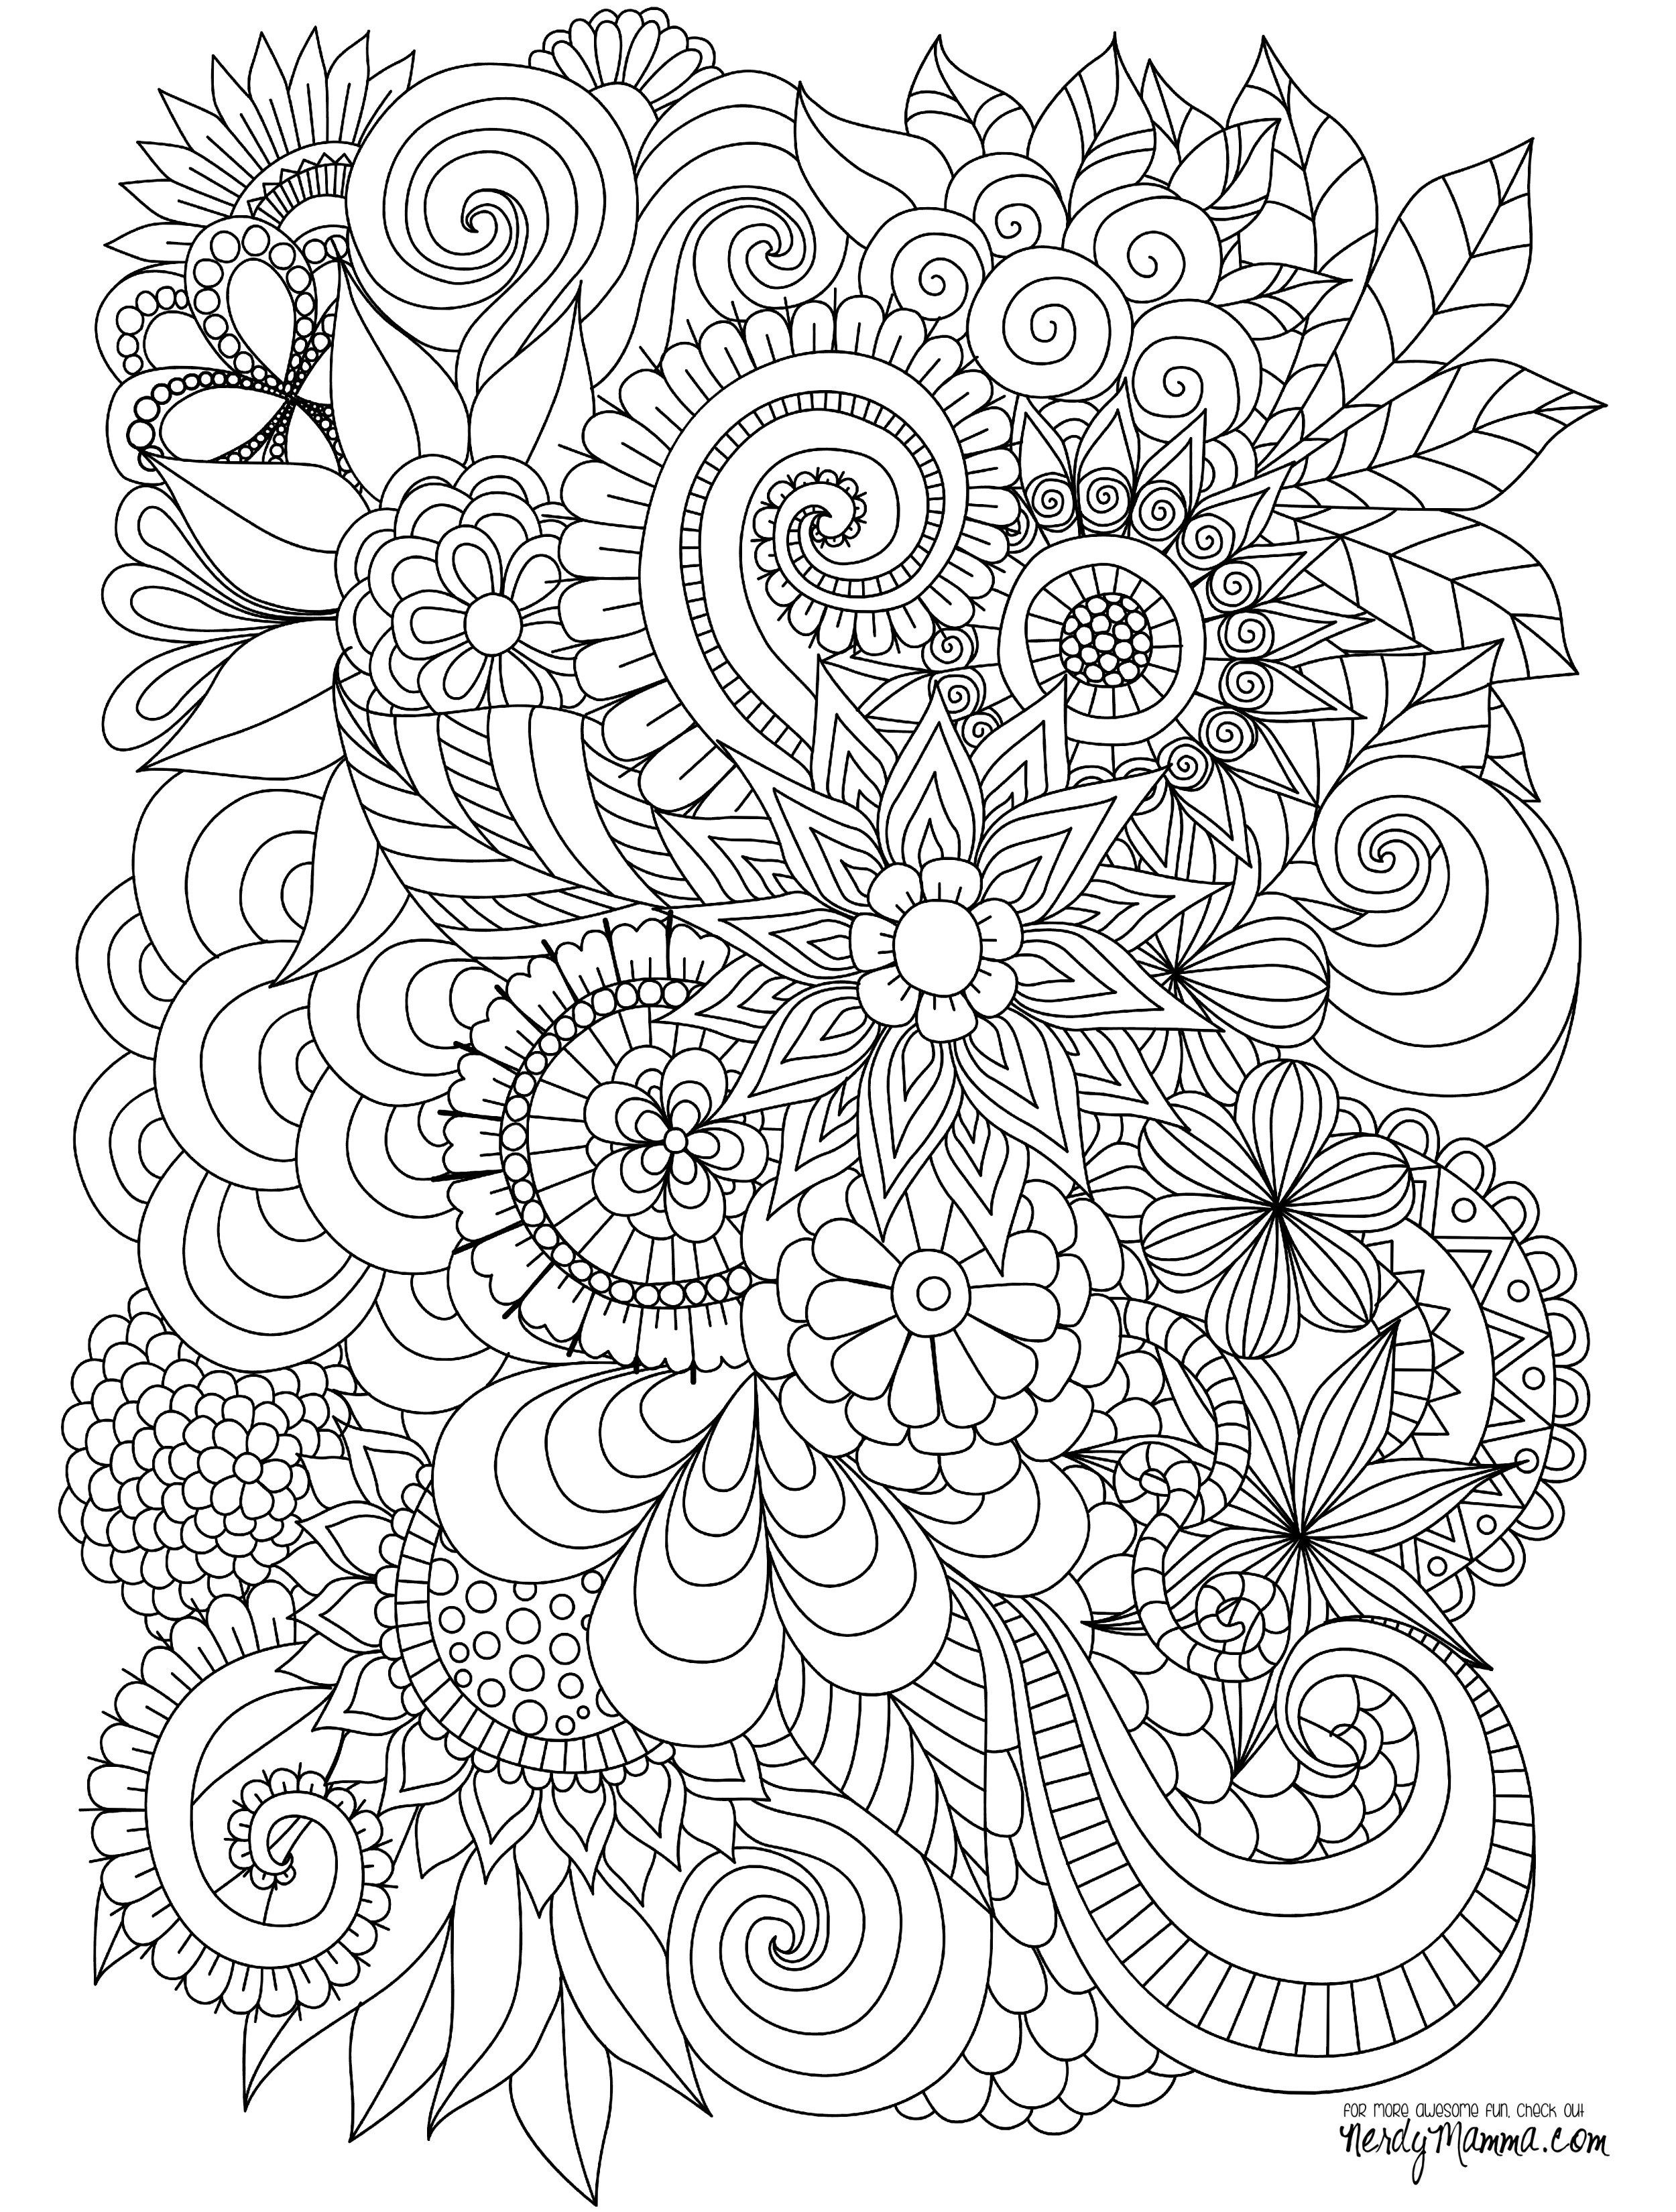 Mehndi Coloring Pages At GetColorings Free Printable Colorings Pages To Print And Color